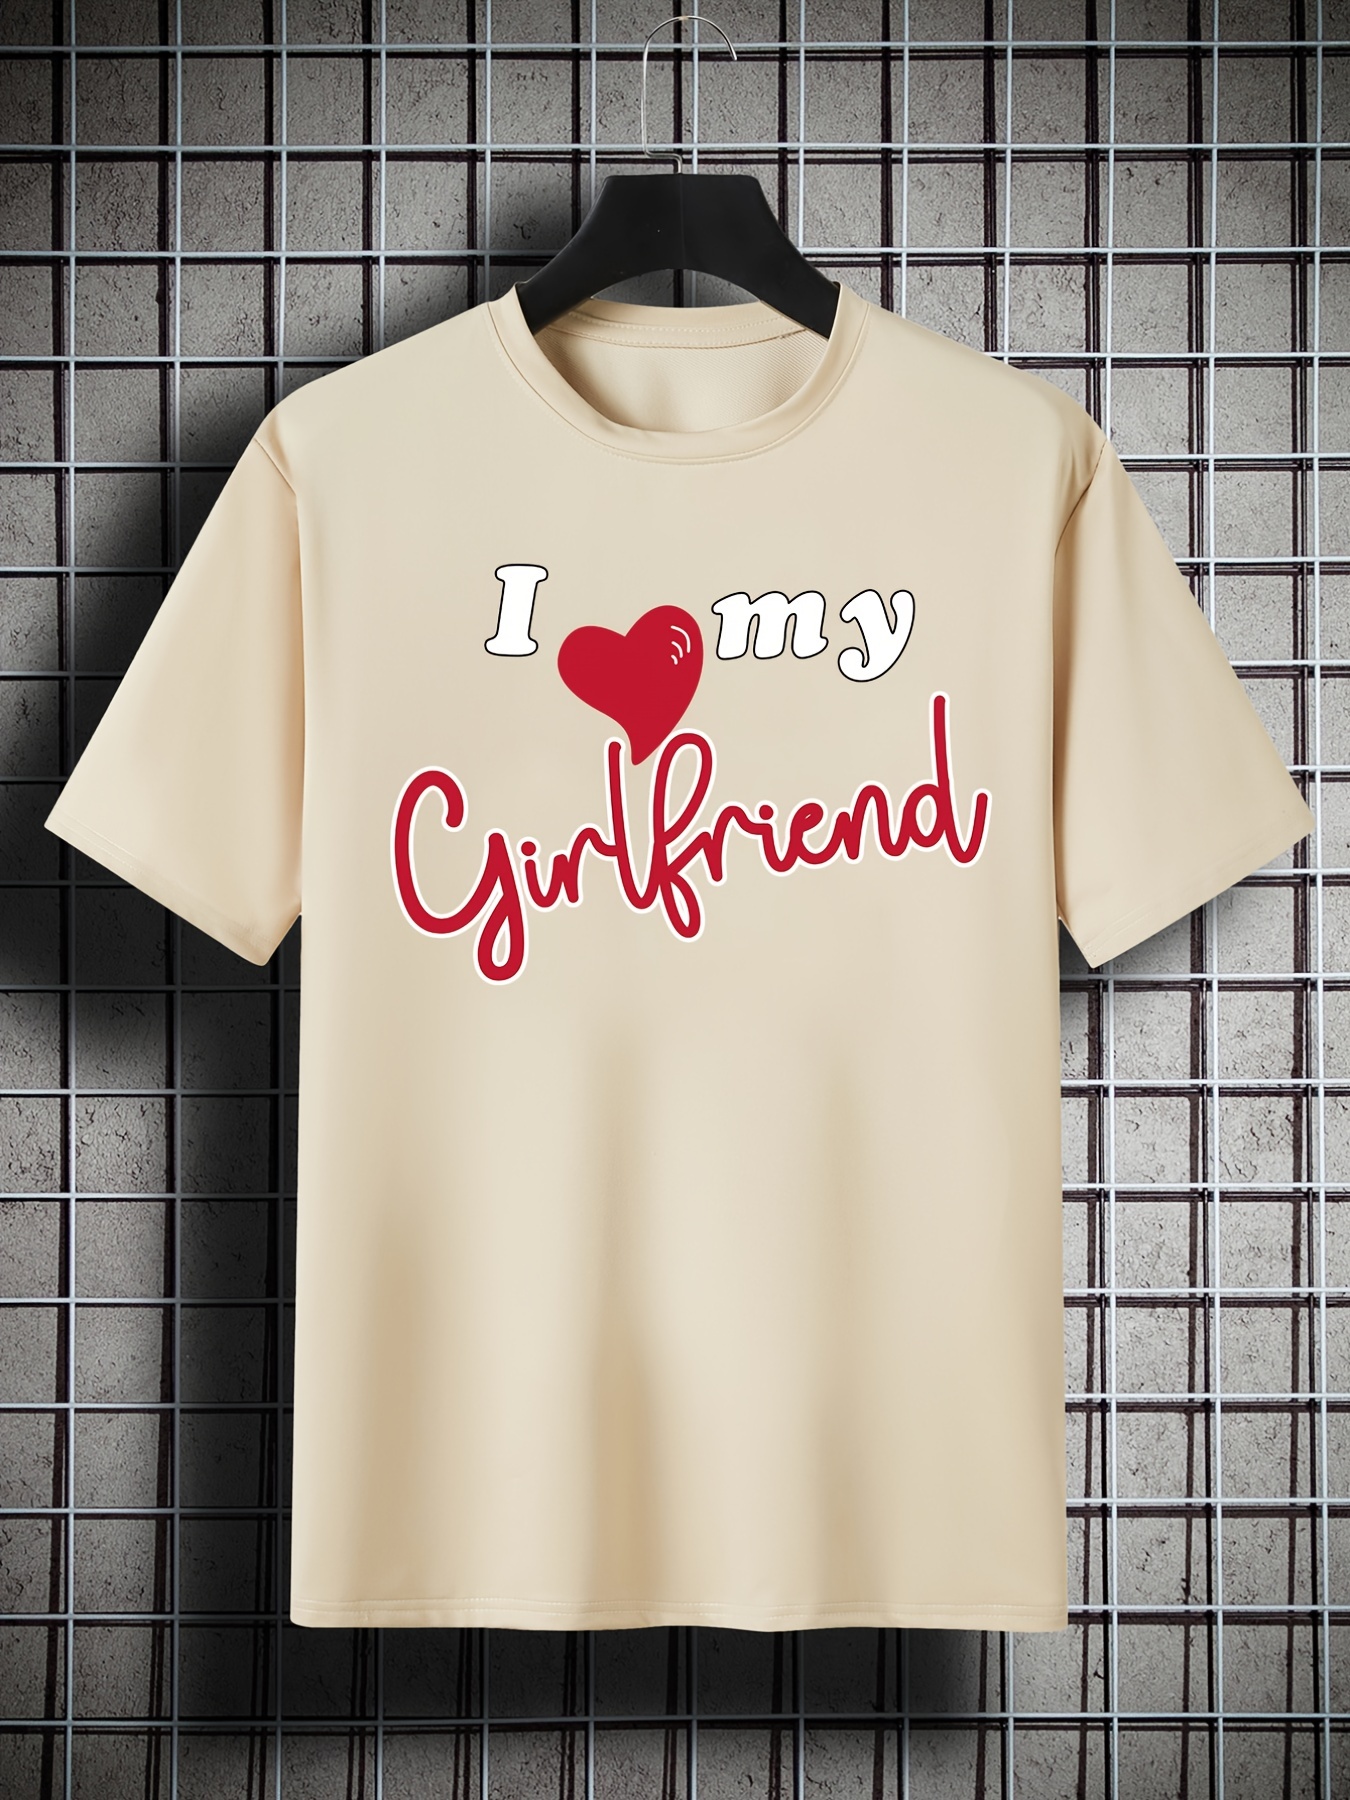 I Love My Girlfriend - Comfortable and Trendy Tee Shirt with Graphic Print